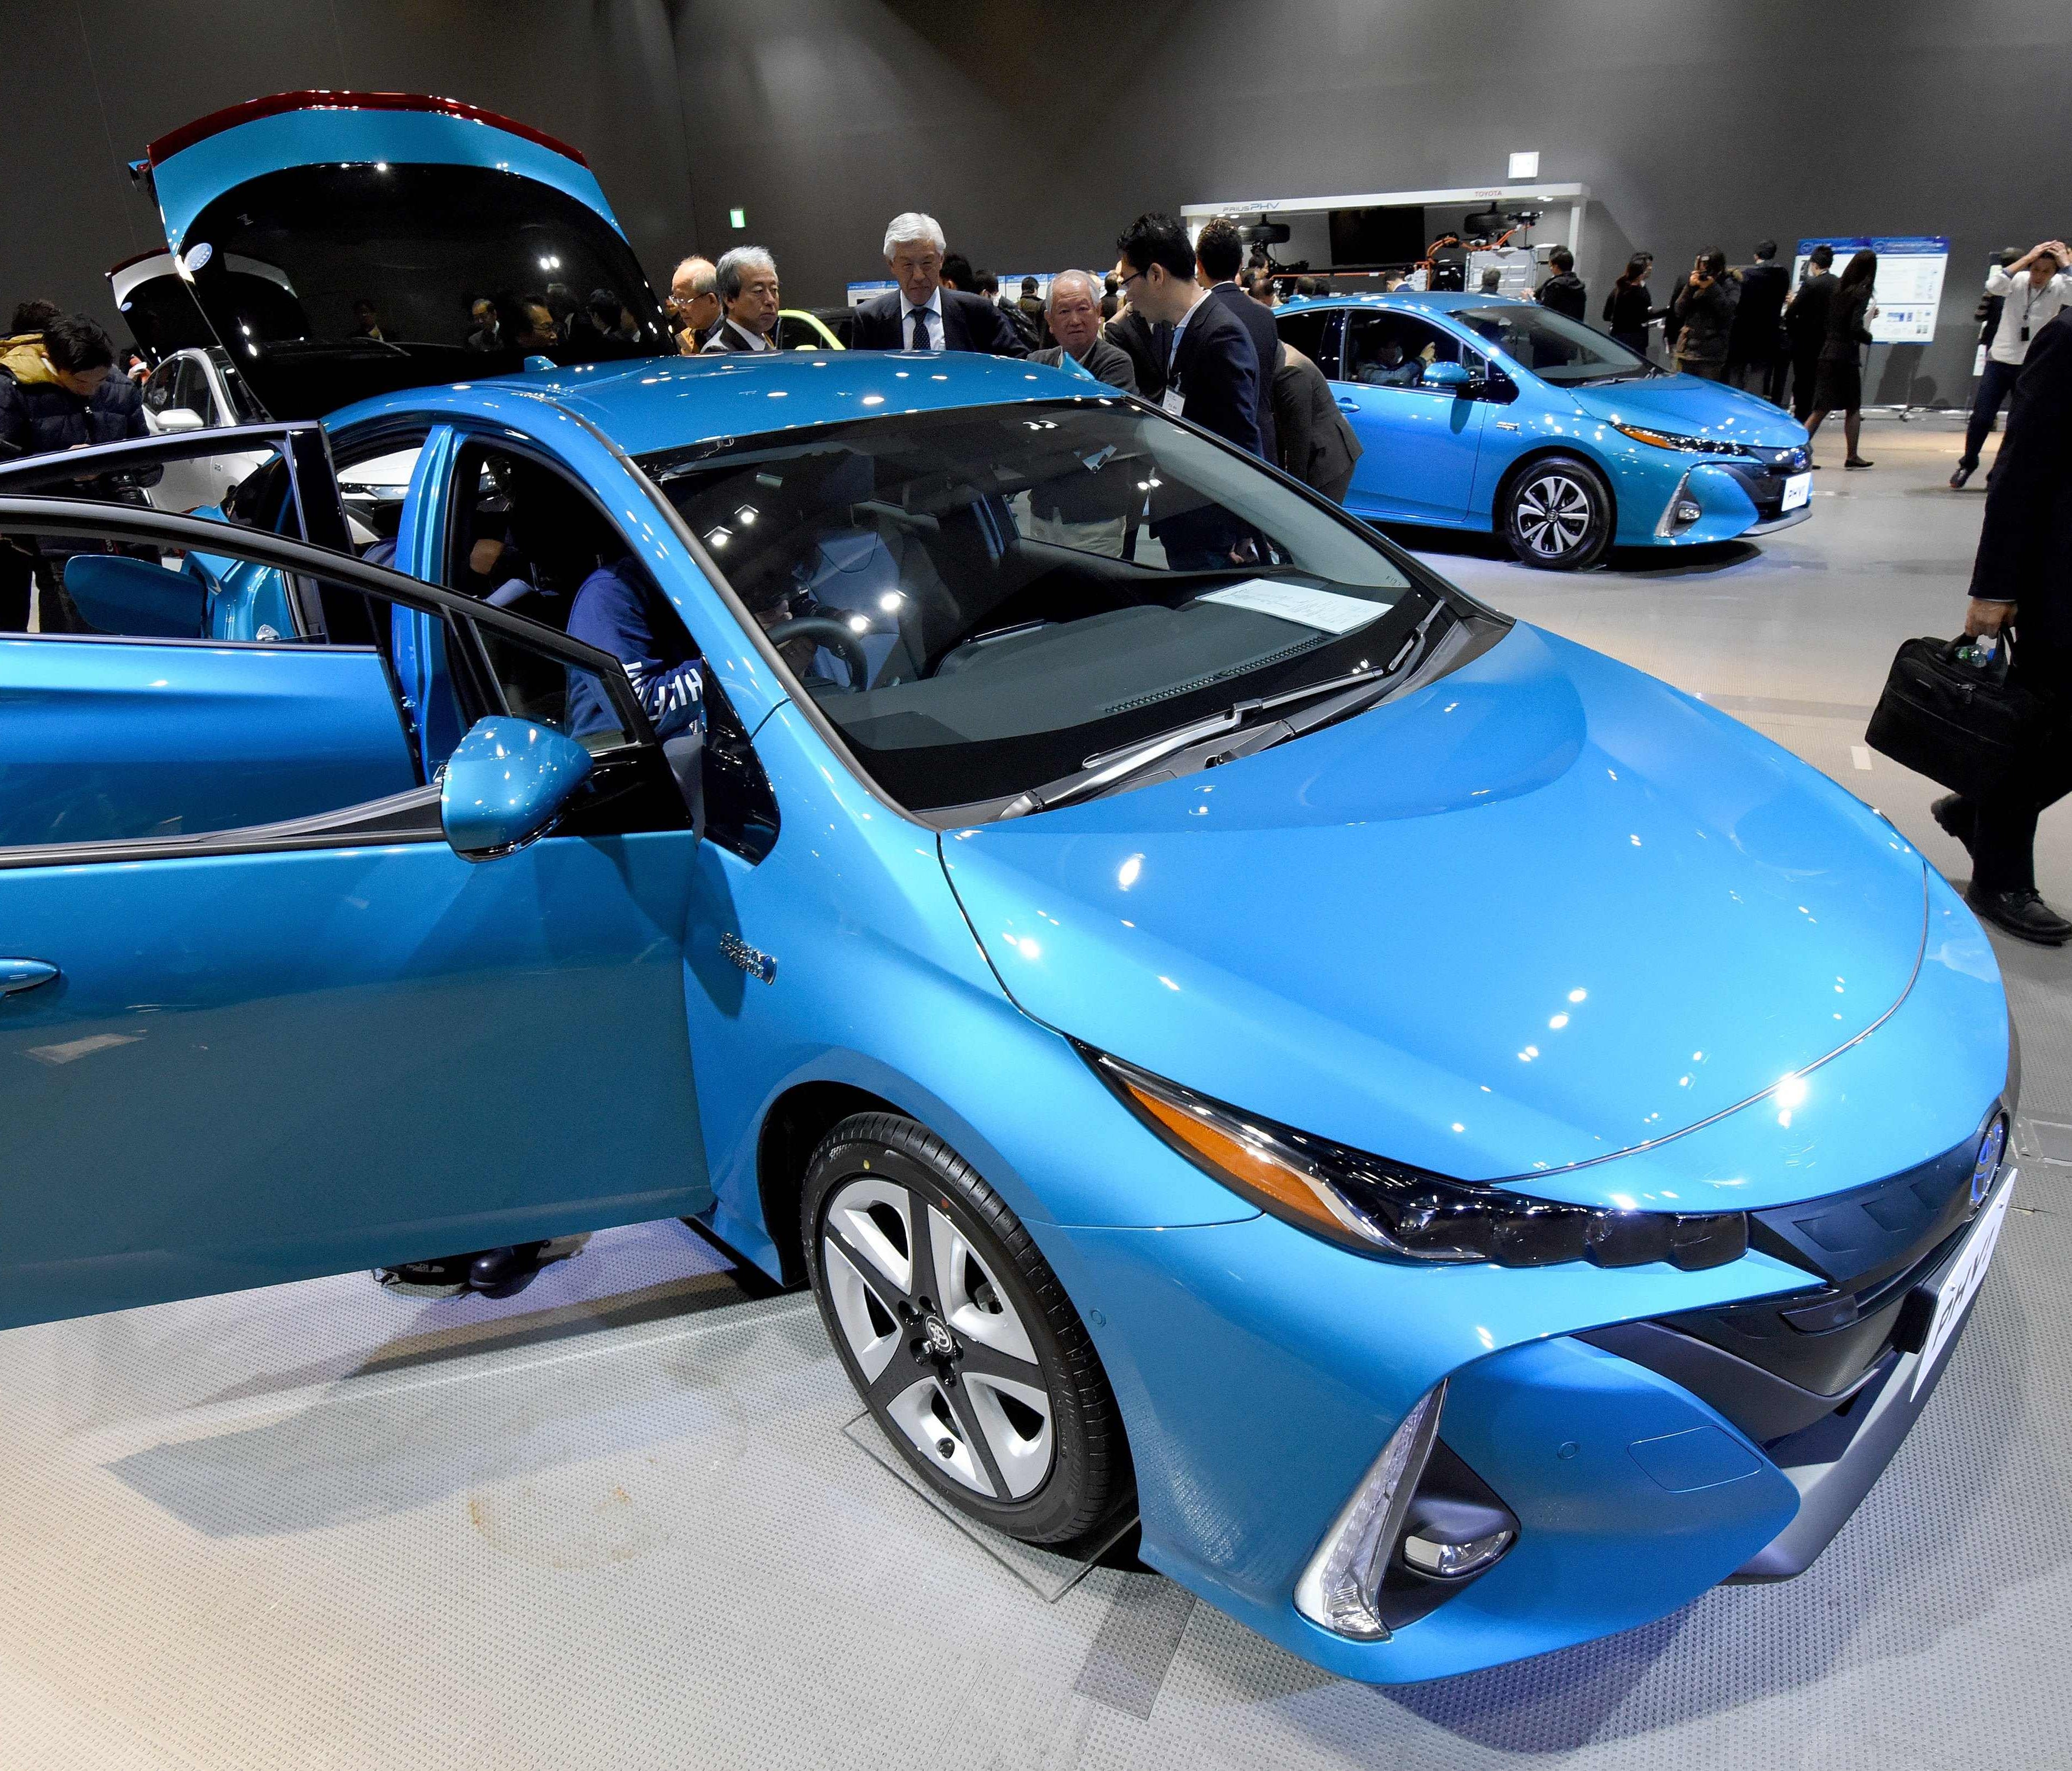 Journalists look at the redesigned Toyota Motor Prius plug-in hybrid vehicle, one of the automaker's electrified models